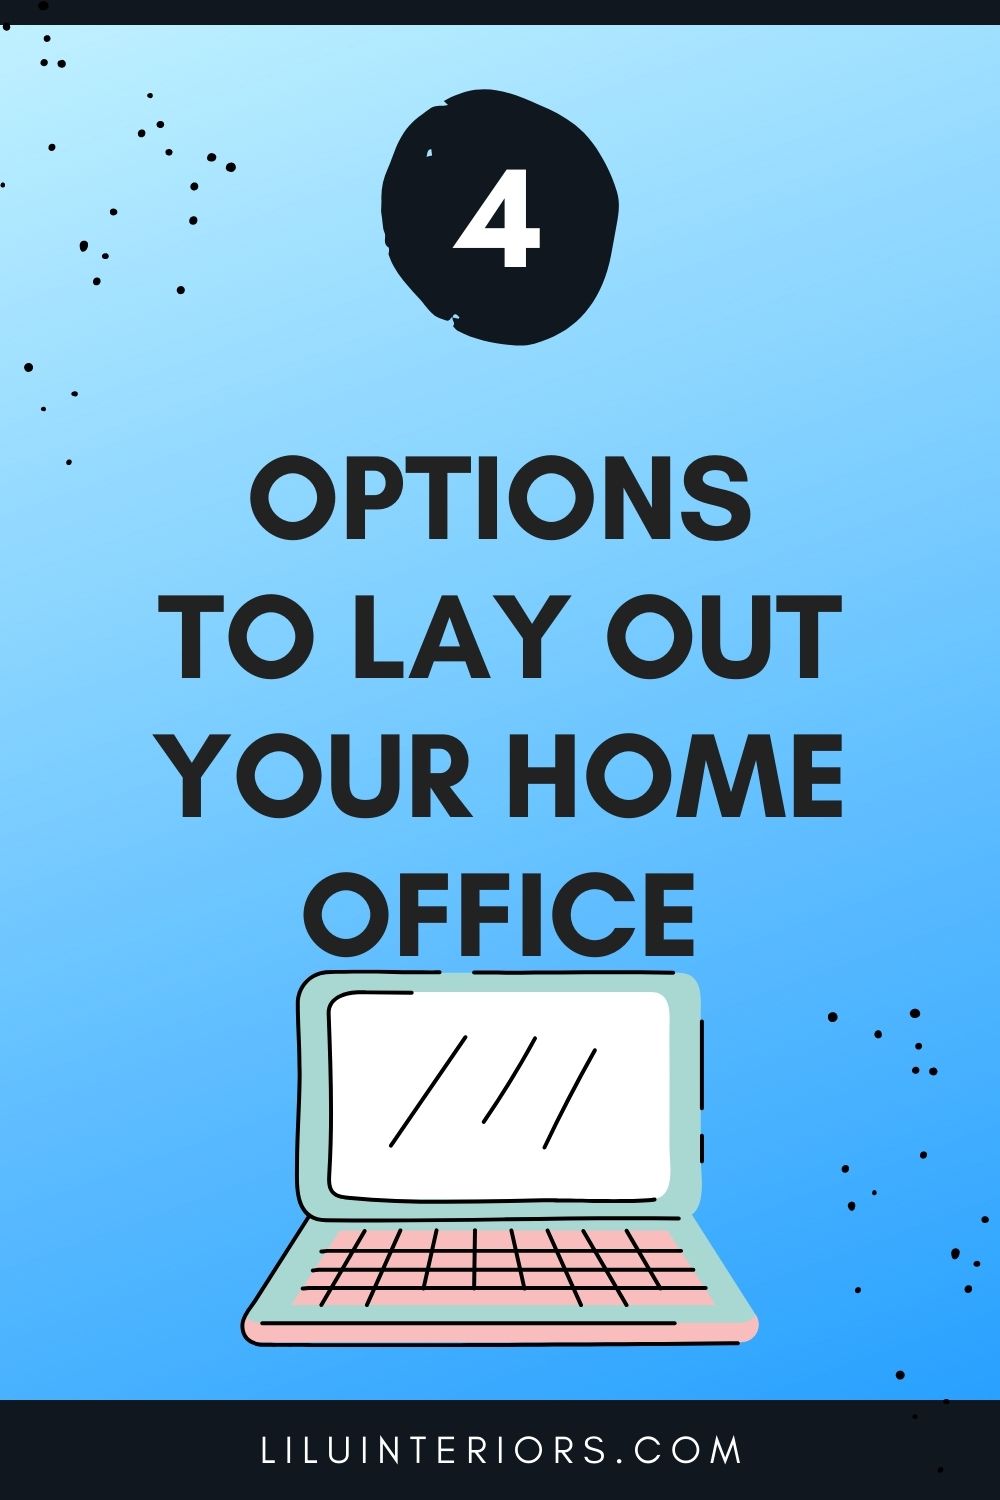 CANVA IMAGE WING HOME OFFICE BLOG